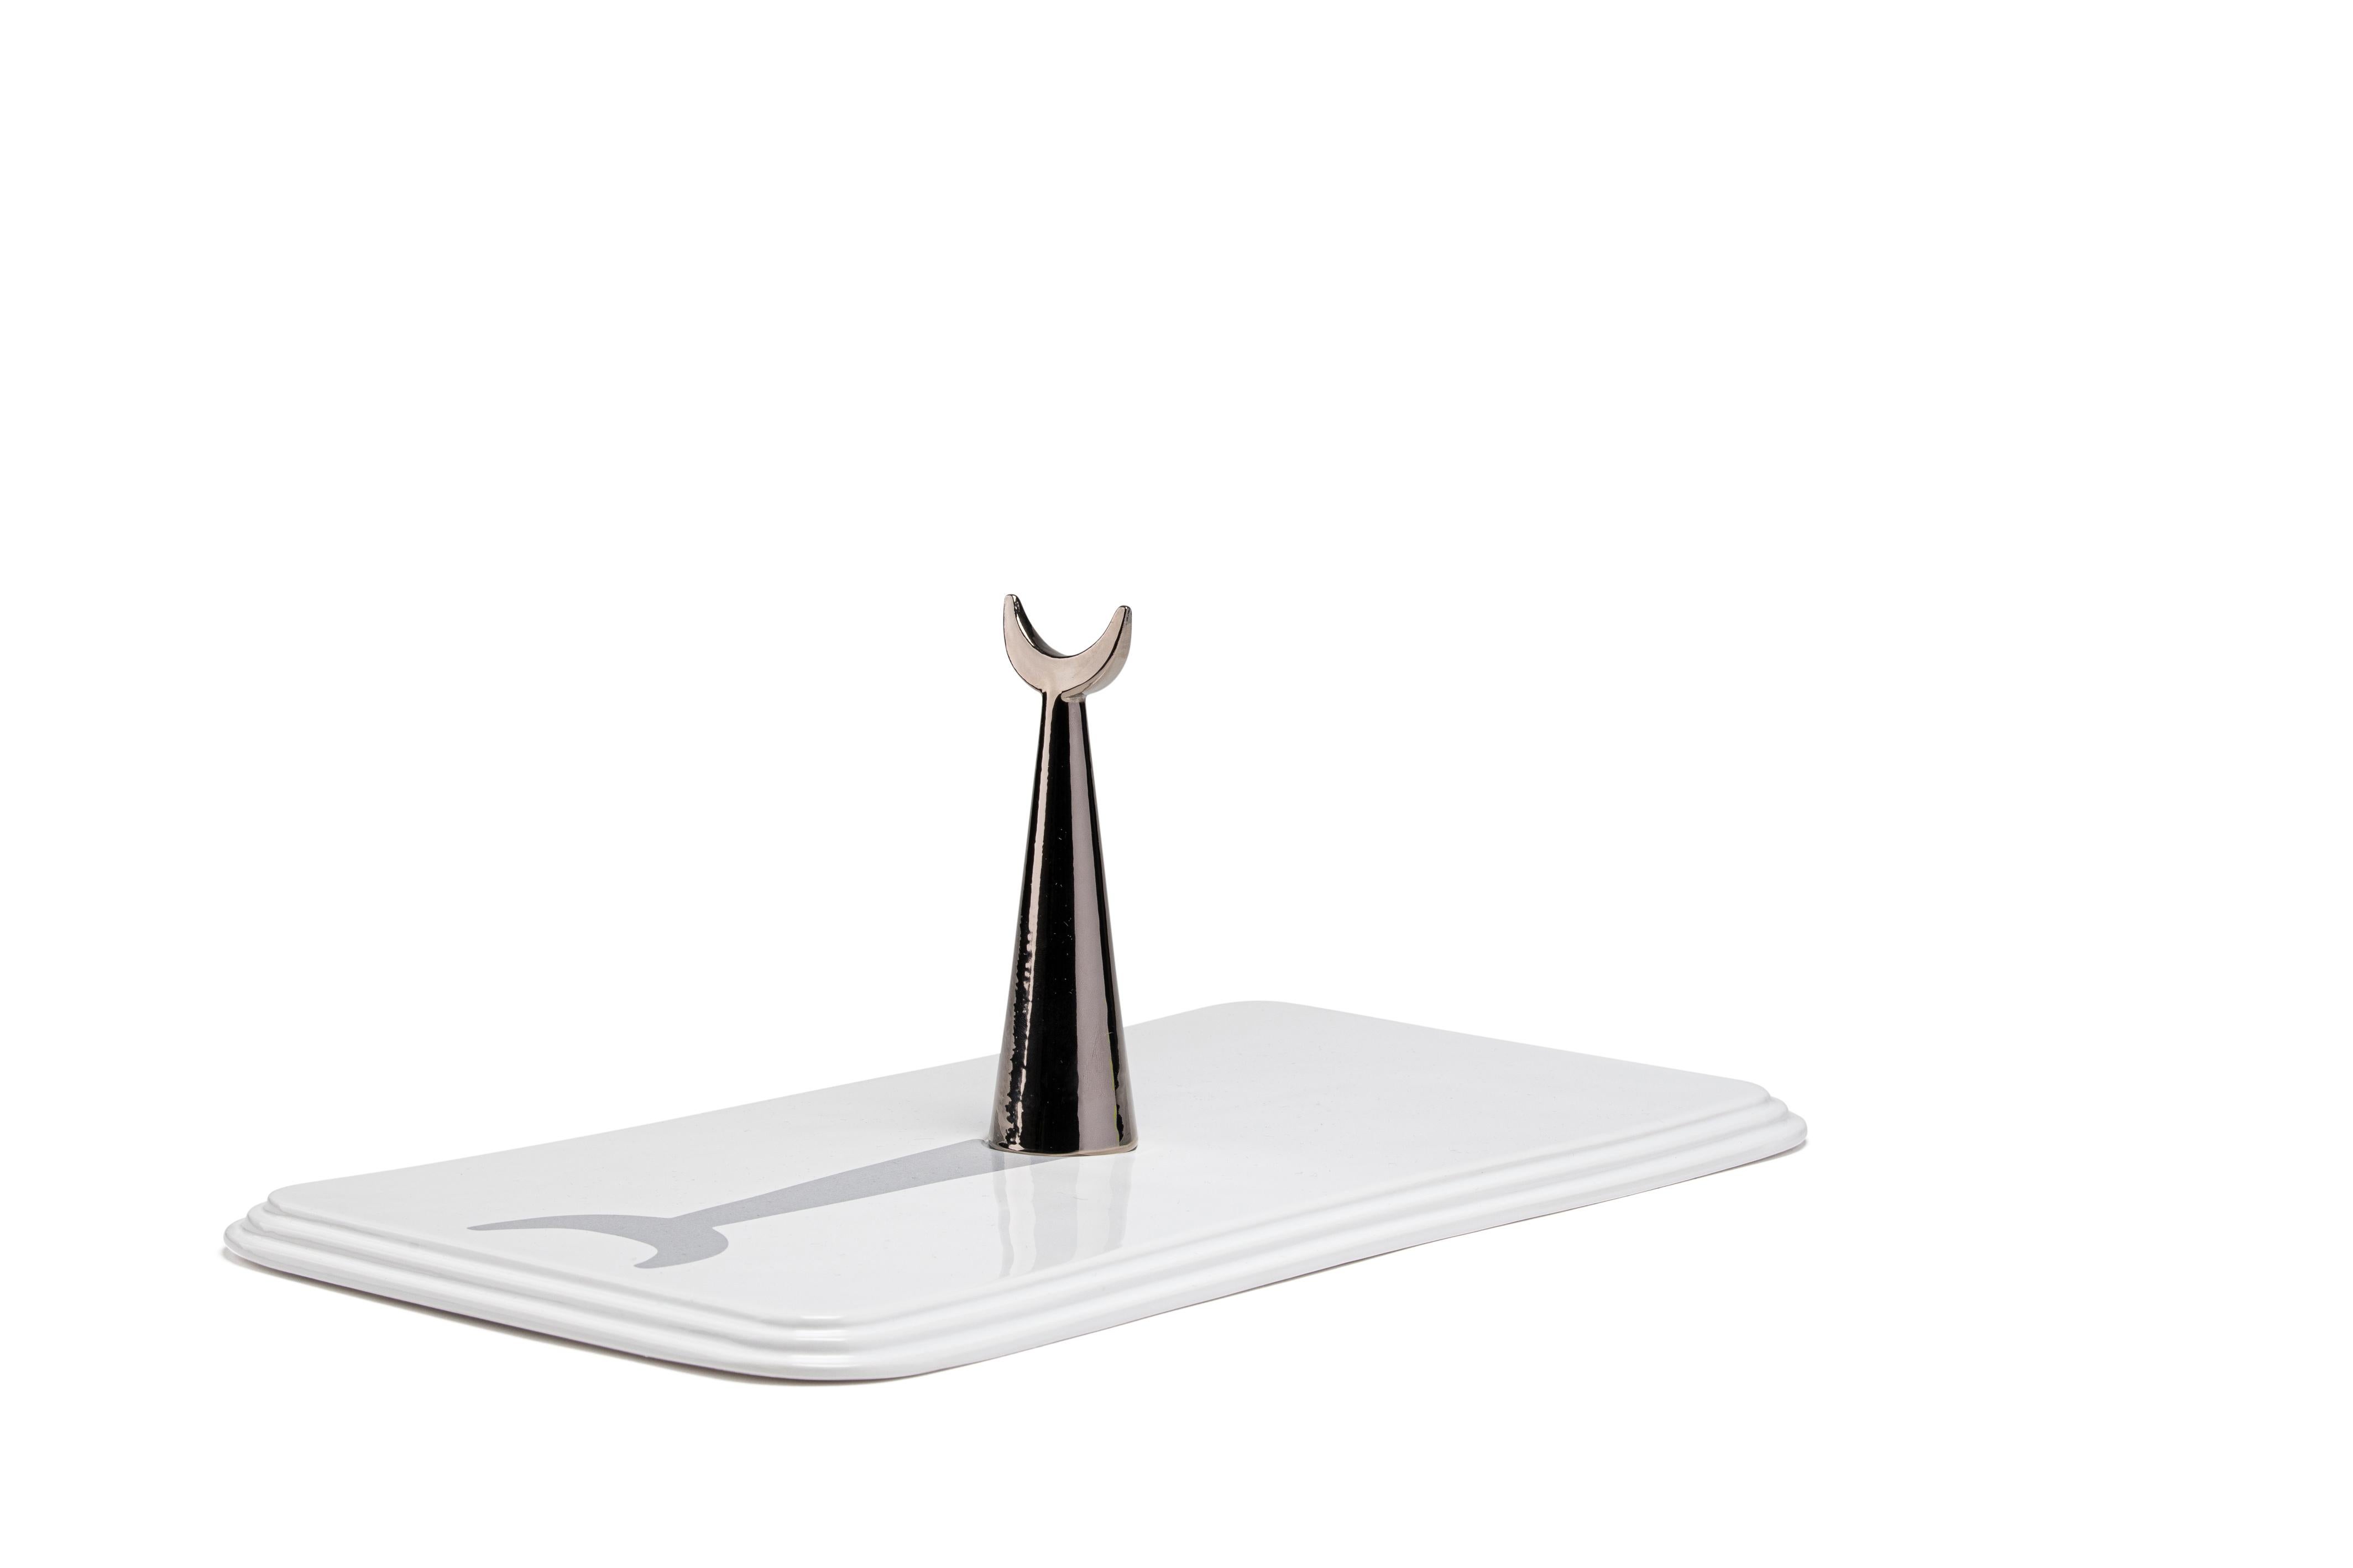 Inspired by the urban element of the ‘piazza’, the white painted ceramic rectangular tray 19:00 from the 'Meridiane' collection is the ideal accessory to serve convivial snacks or to simply decorate a table.
Its minimalist yet sophisticated shape is